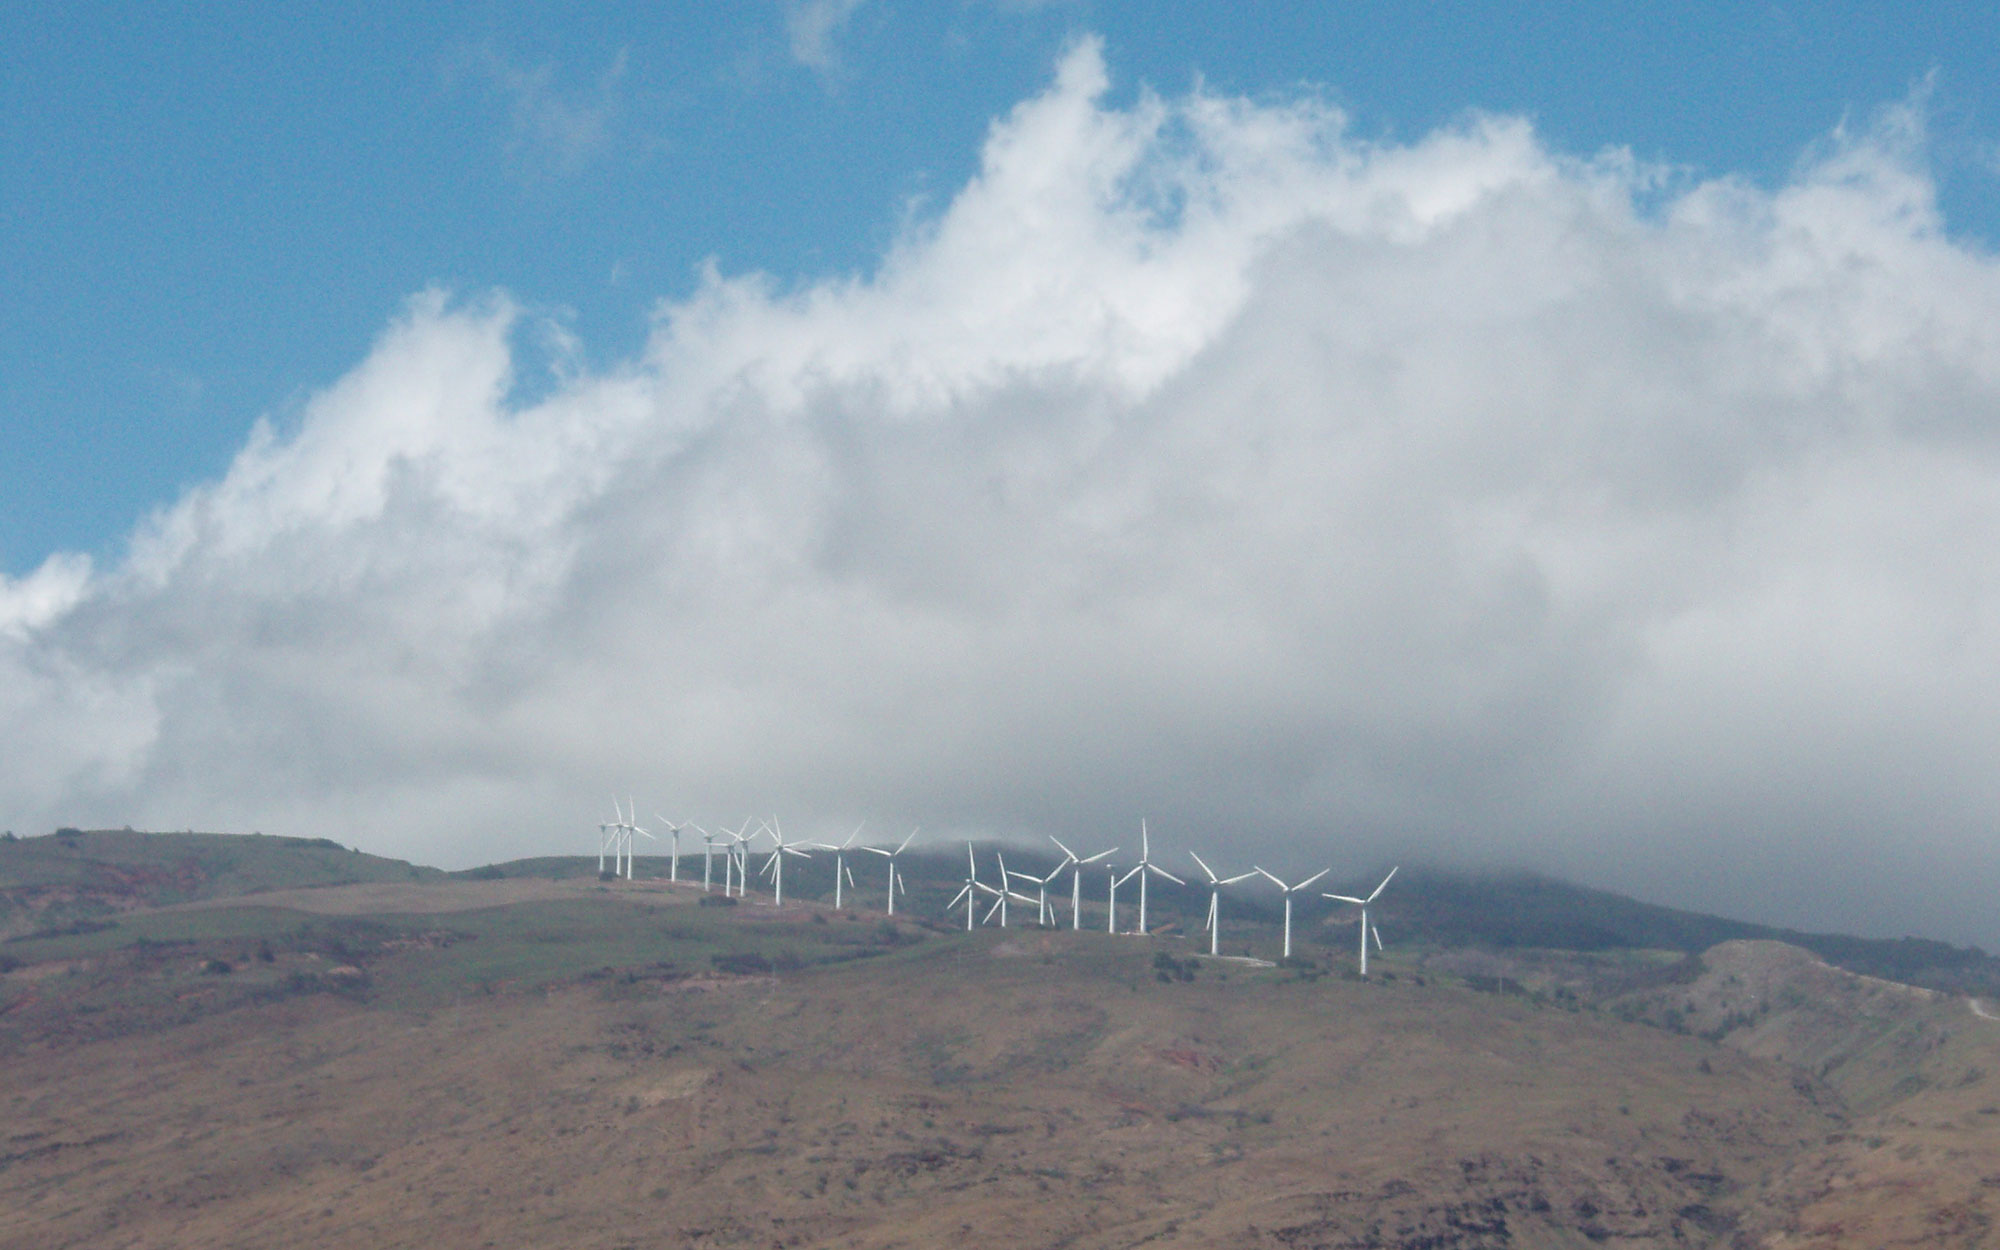 Photograph of Kaheawa wind farm, Maui, 2010. The photo shows a line of white wind turbines on a ridge with white clouds in the sky above. The ridge appears rather dry.